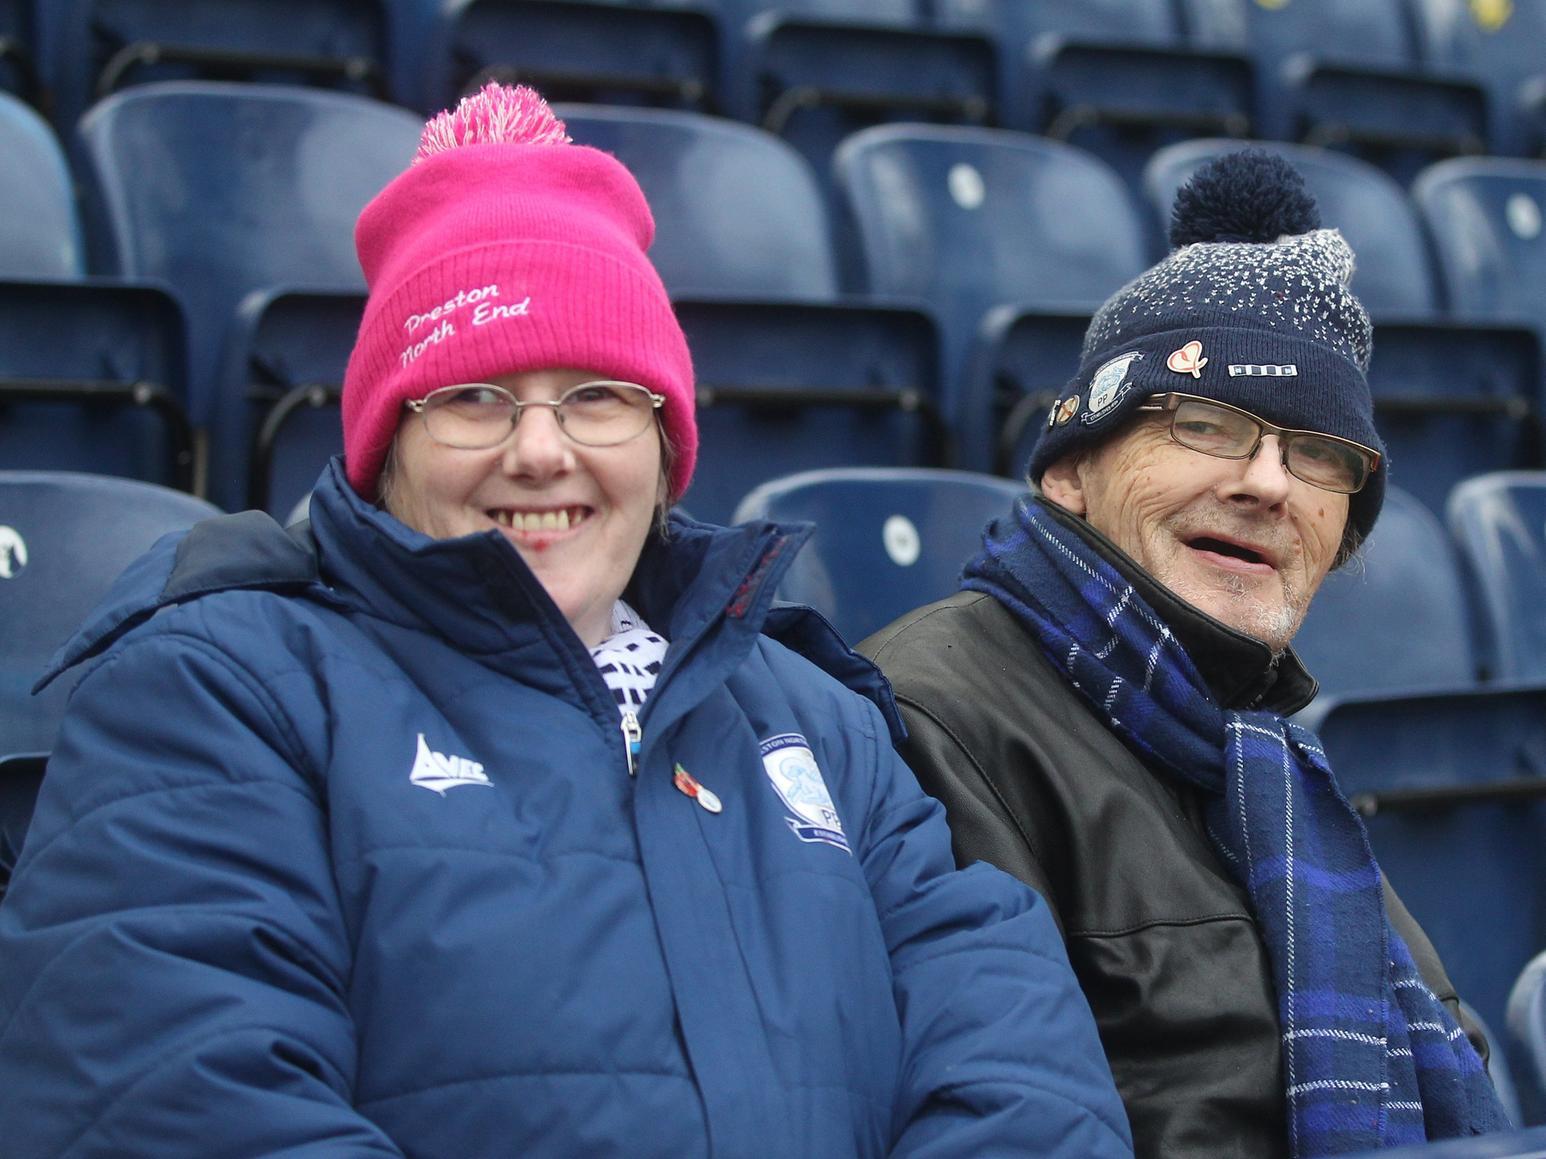 More PNE fans are caught by our snapper in a good mood before Saturday's draw.